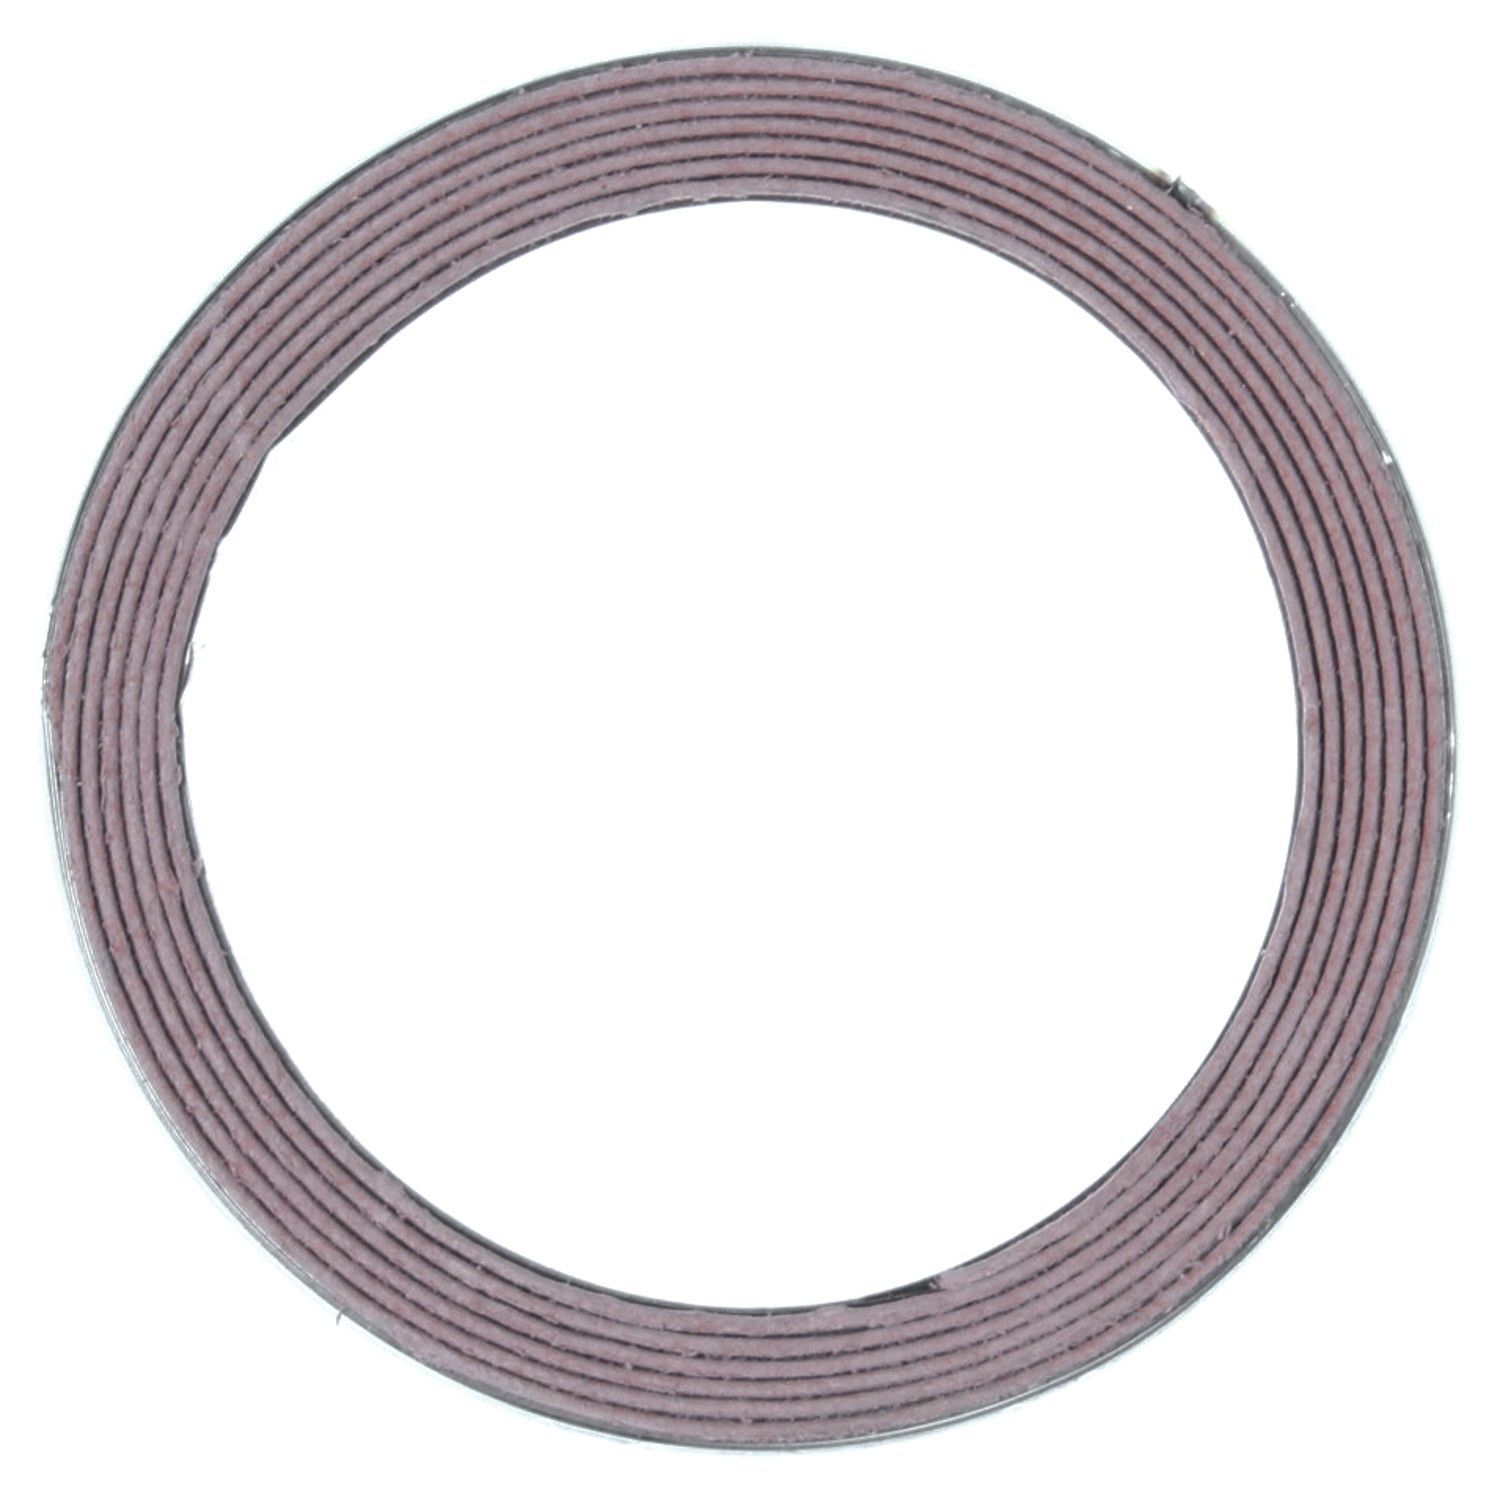 MAHLE ORIGINAL - Exhaust Pipe Flange Gasket - MHL F32750